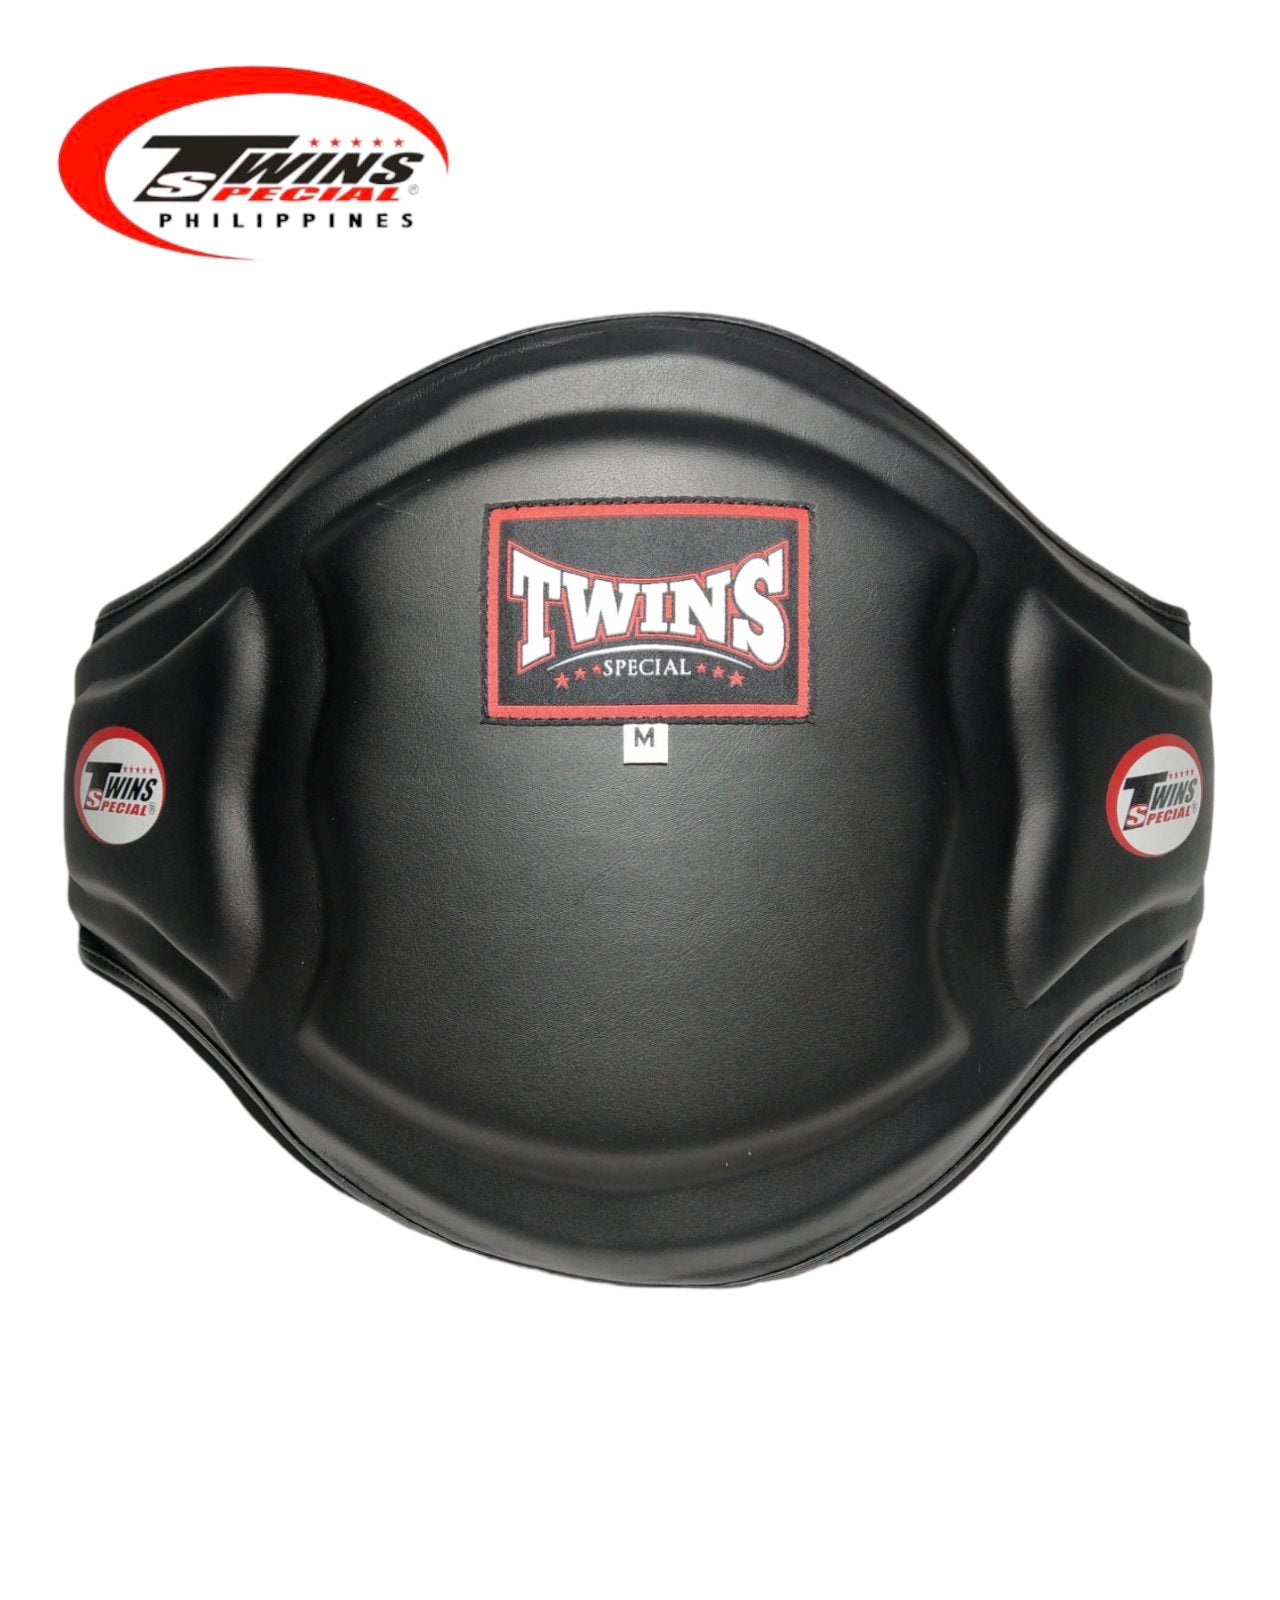 TWINS SPECIAL BEPS3 Muaythai Belly Pads Black